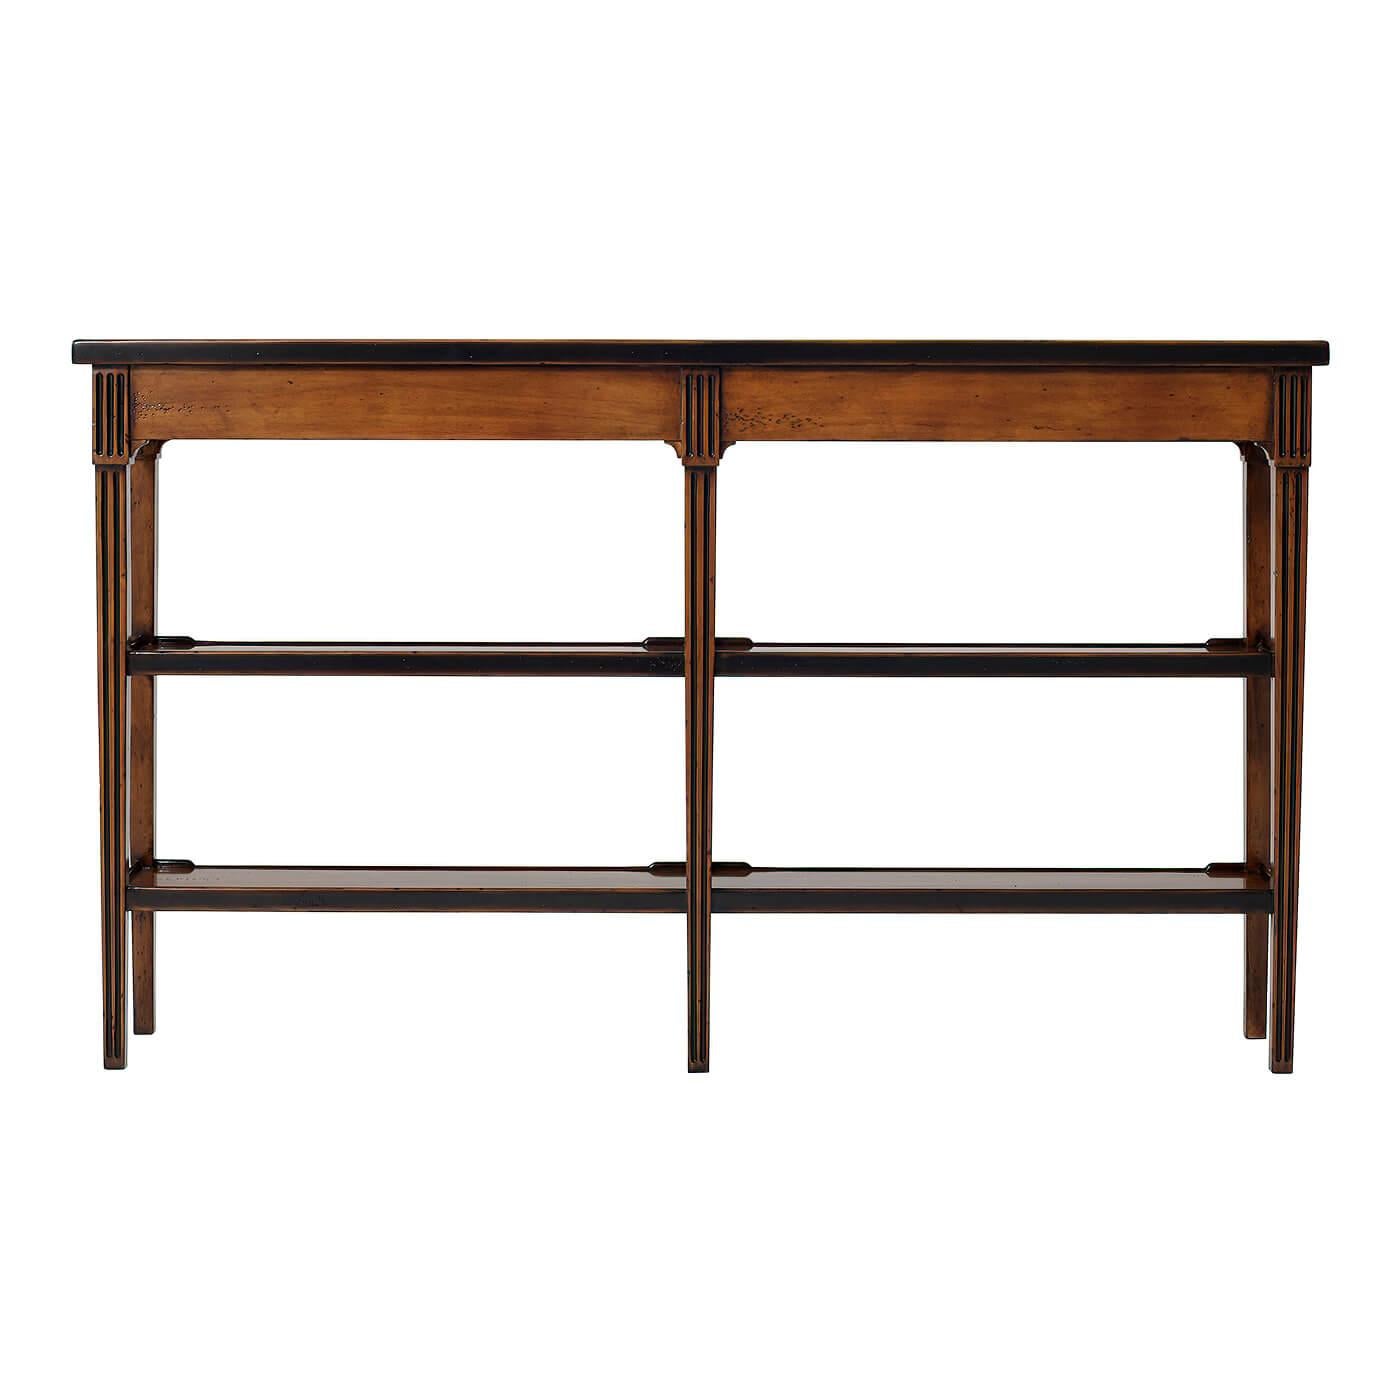 A French Provincial rustic honey finish console table, the rectangular three quarter gallery top with an ebonized edge, above four fluted frieze drawers, on square fluted legs, joined by two tiers. 

Dimensions: 58